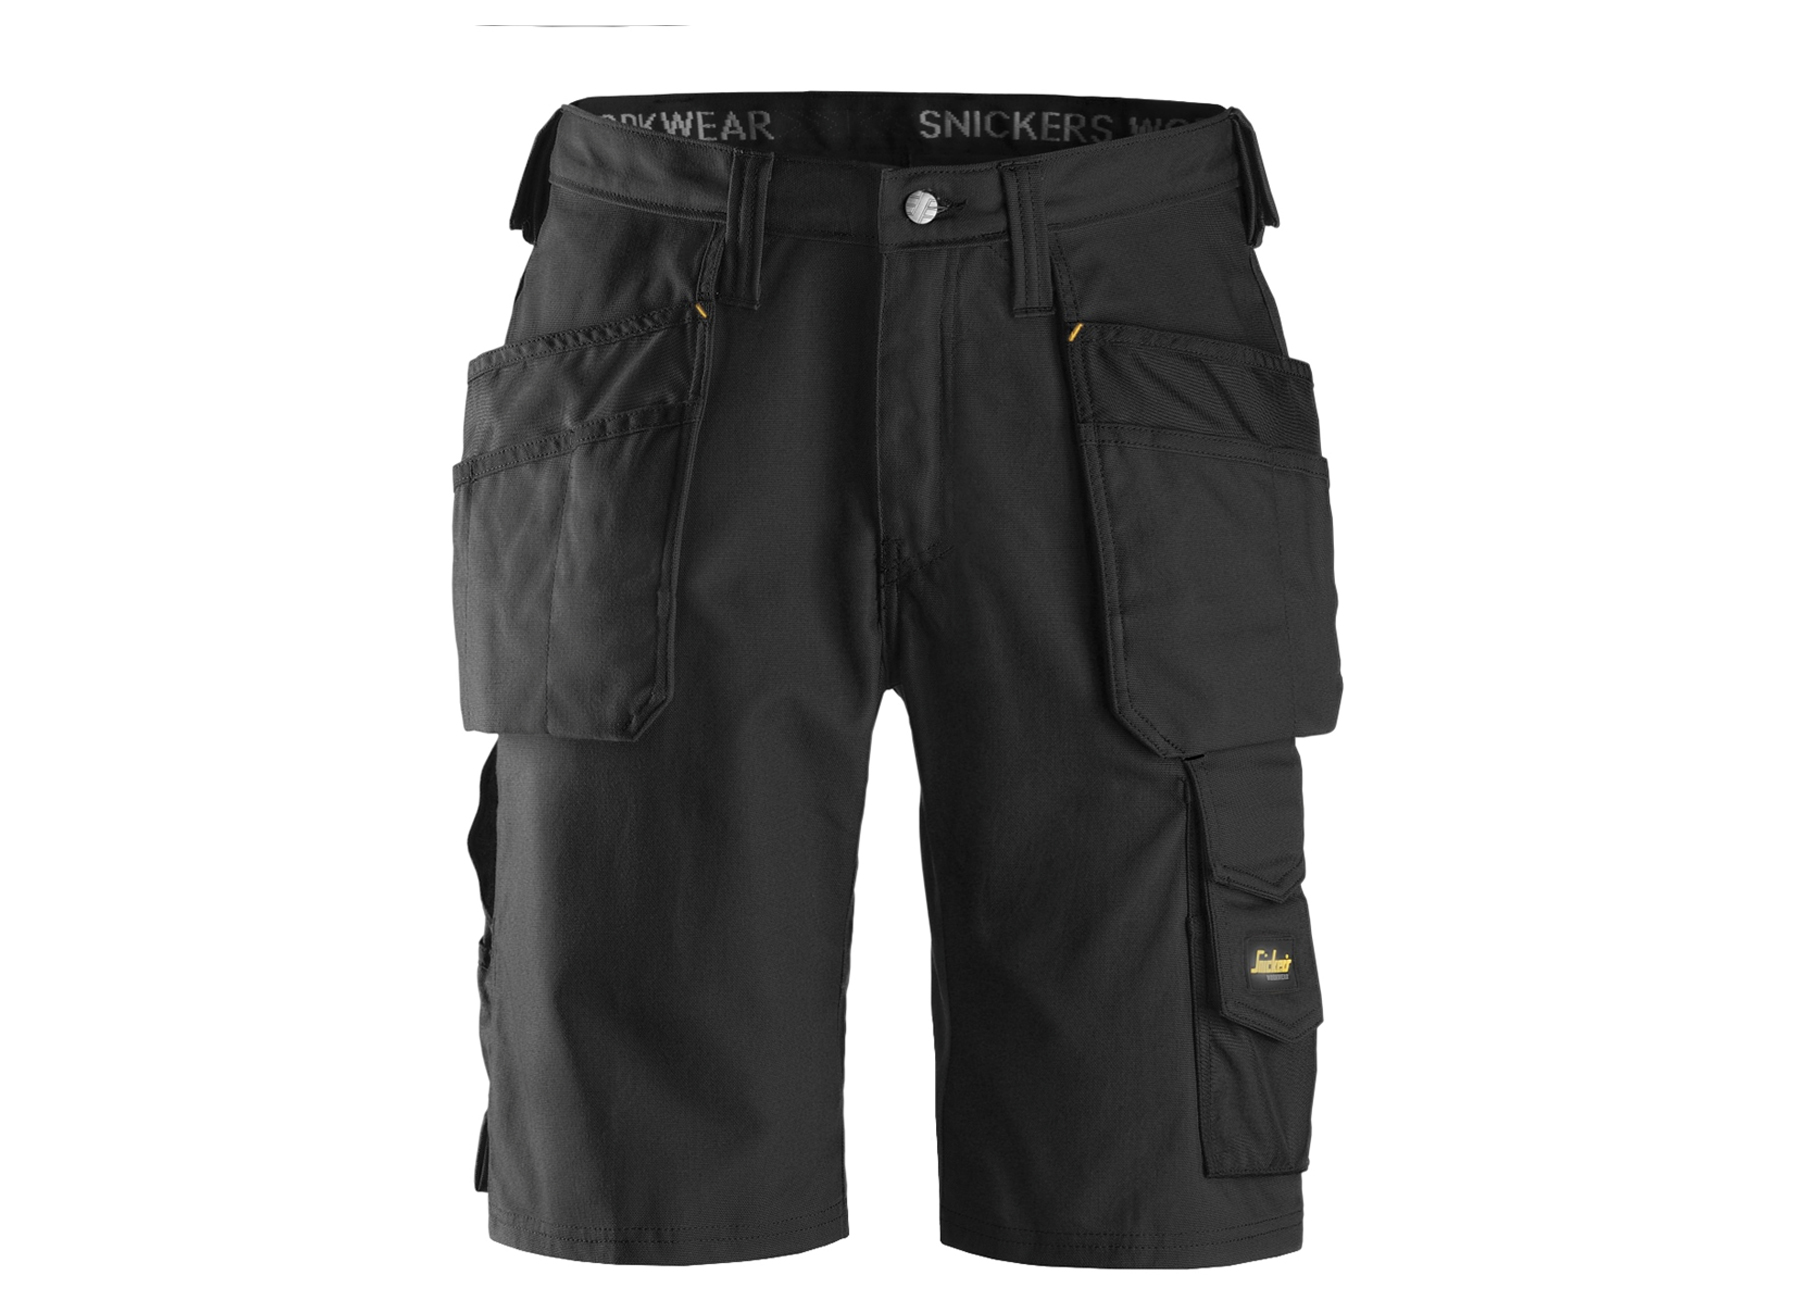 SNICKERS CANVAS+ SHORT AVEC POCHES HOLSTER 3014 BLACK - M:54